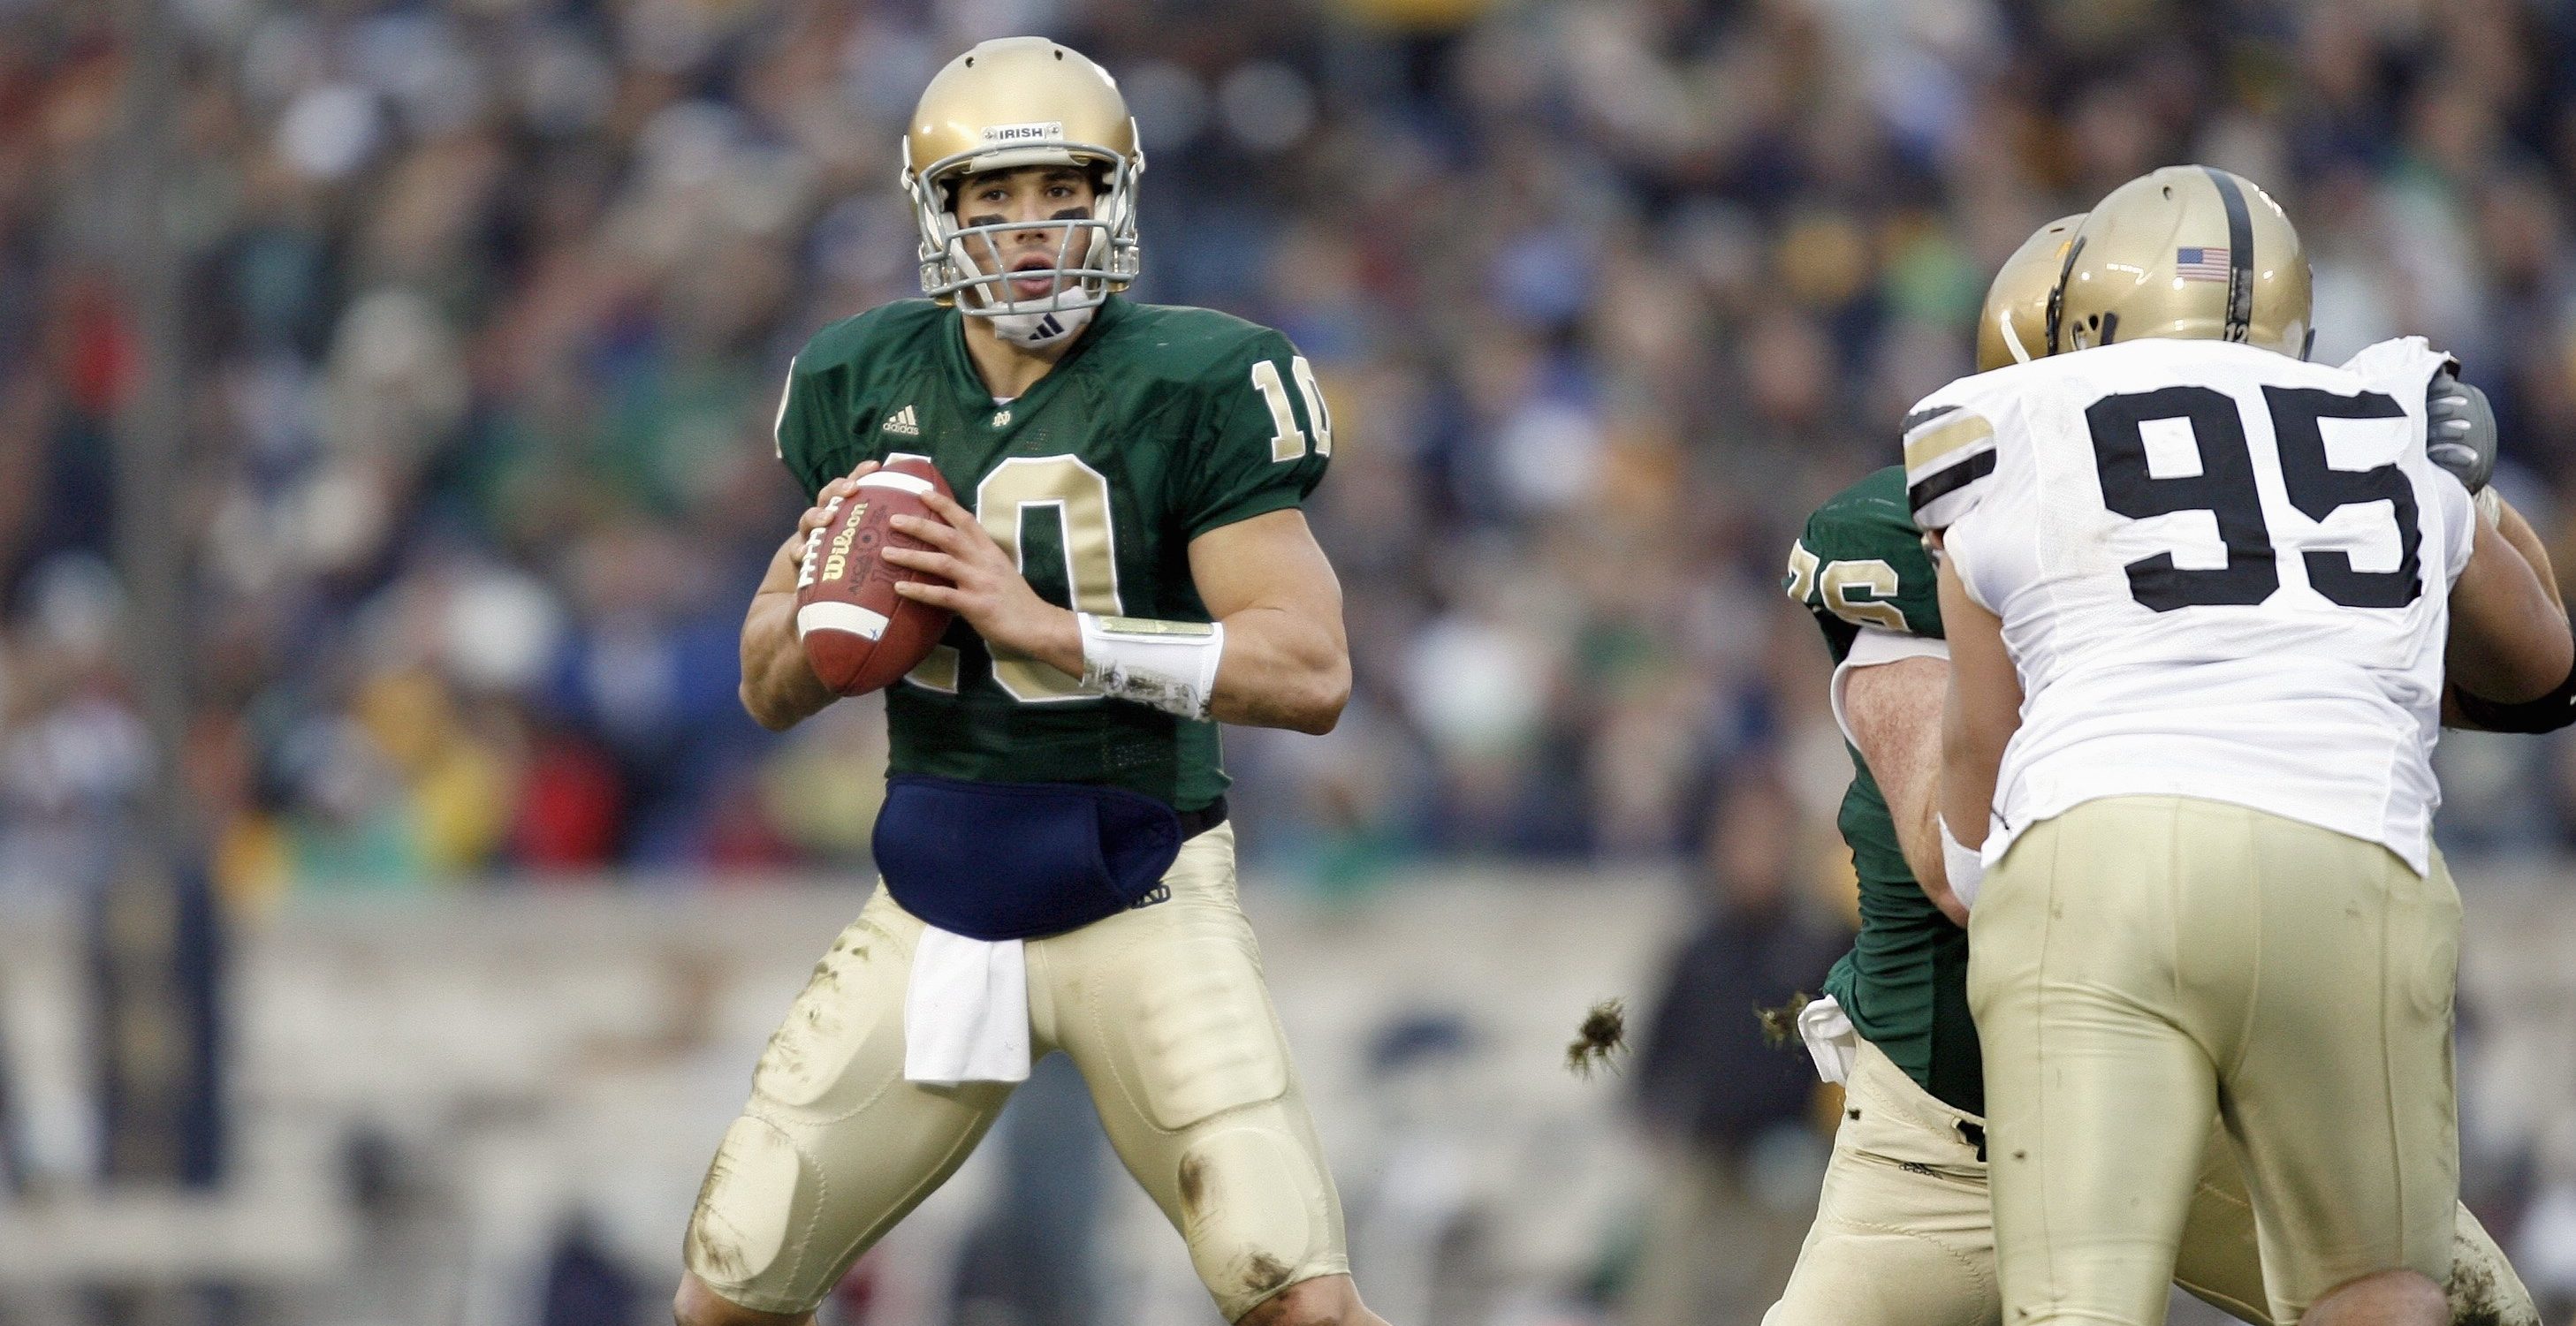 Notre Dame's Green Jerseys Have a Storied Past